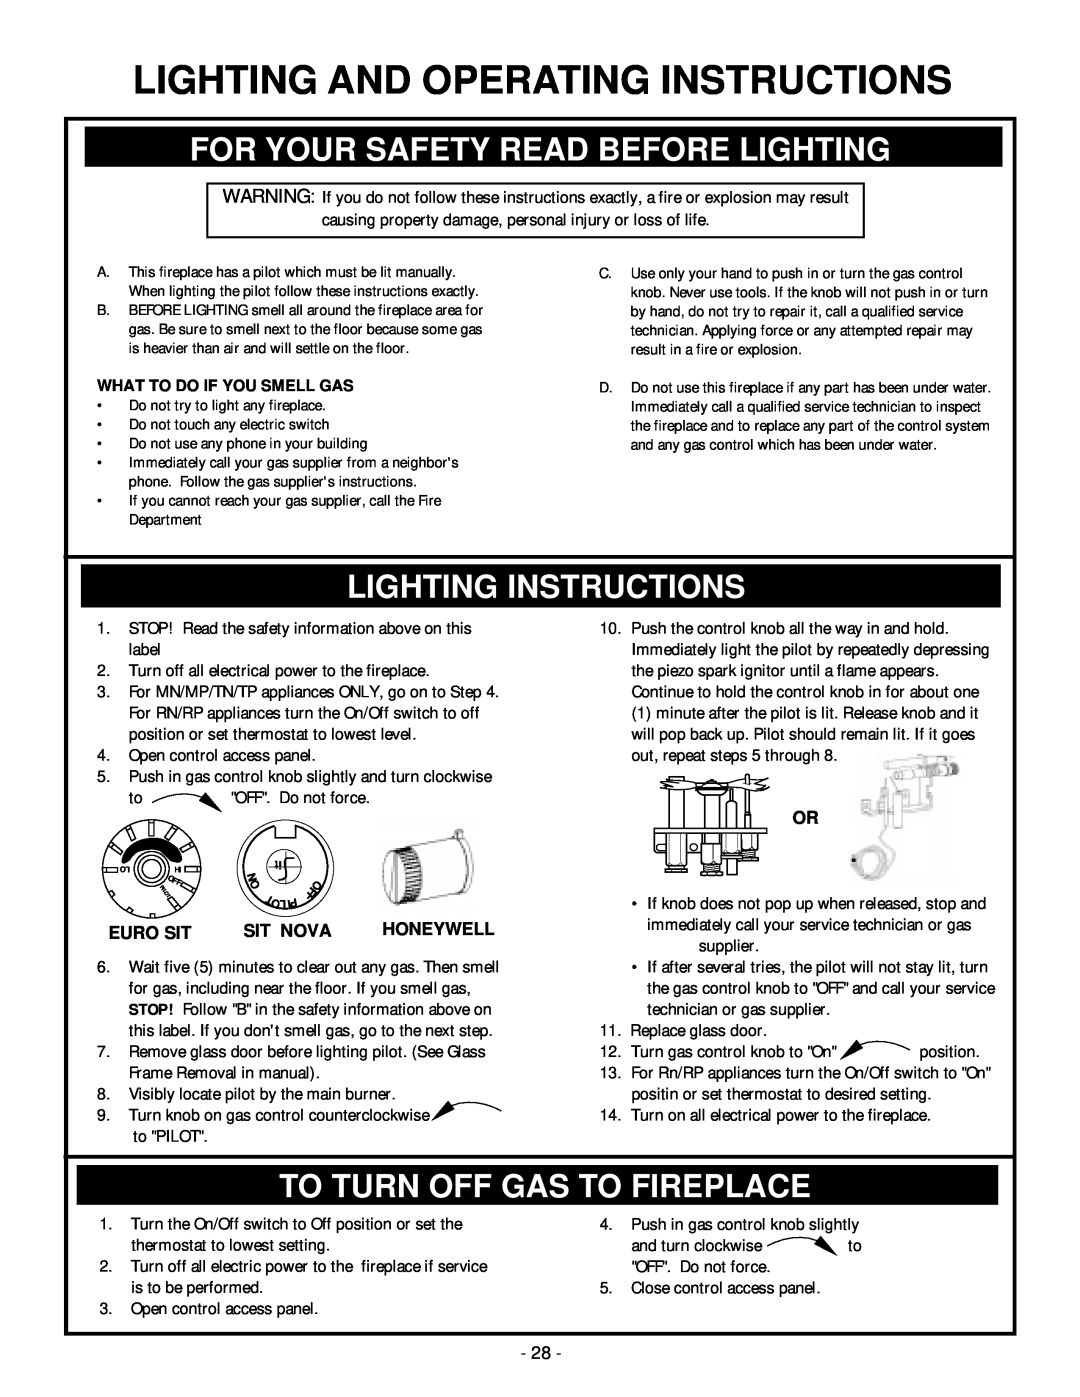 Vermont Casting BHDT36 For Your Safety Read Before Lighting, Lighting Instructions, To Turn Off Gas To Fireplace 